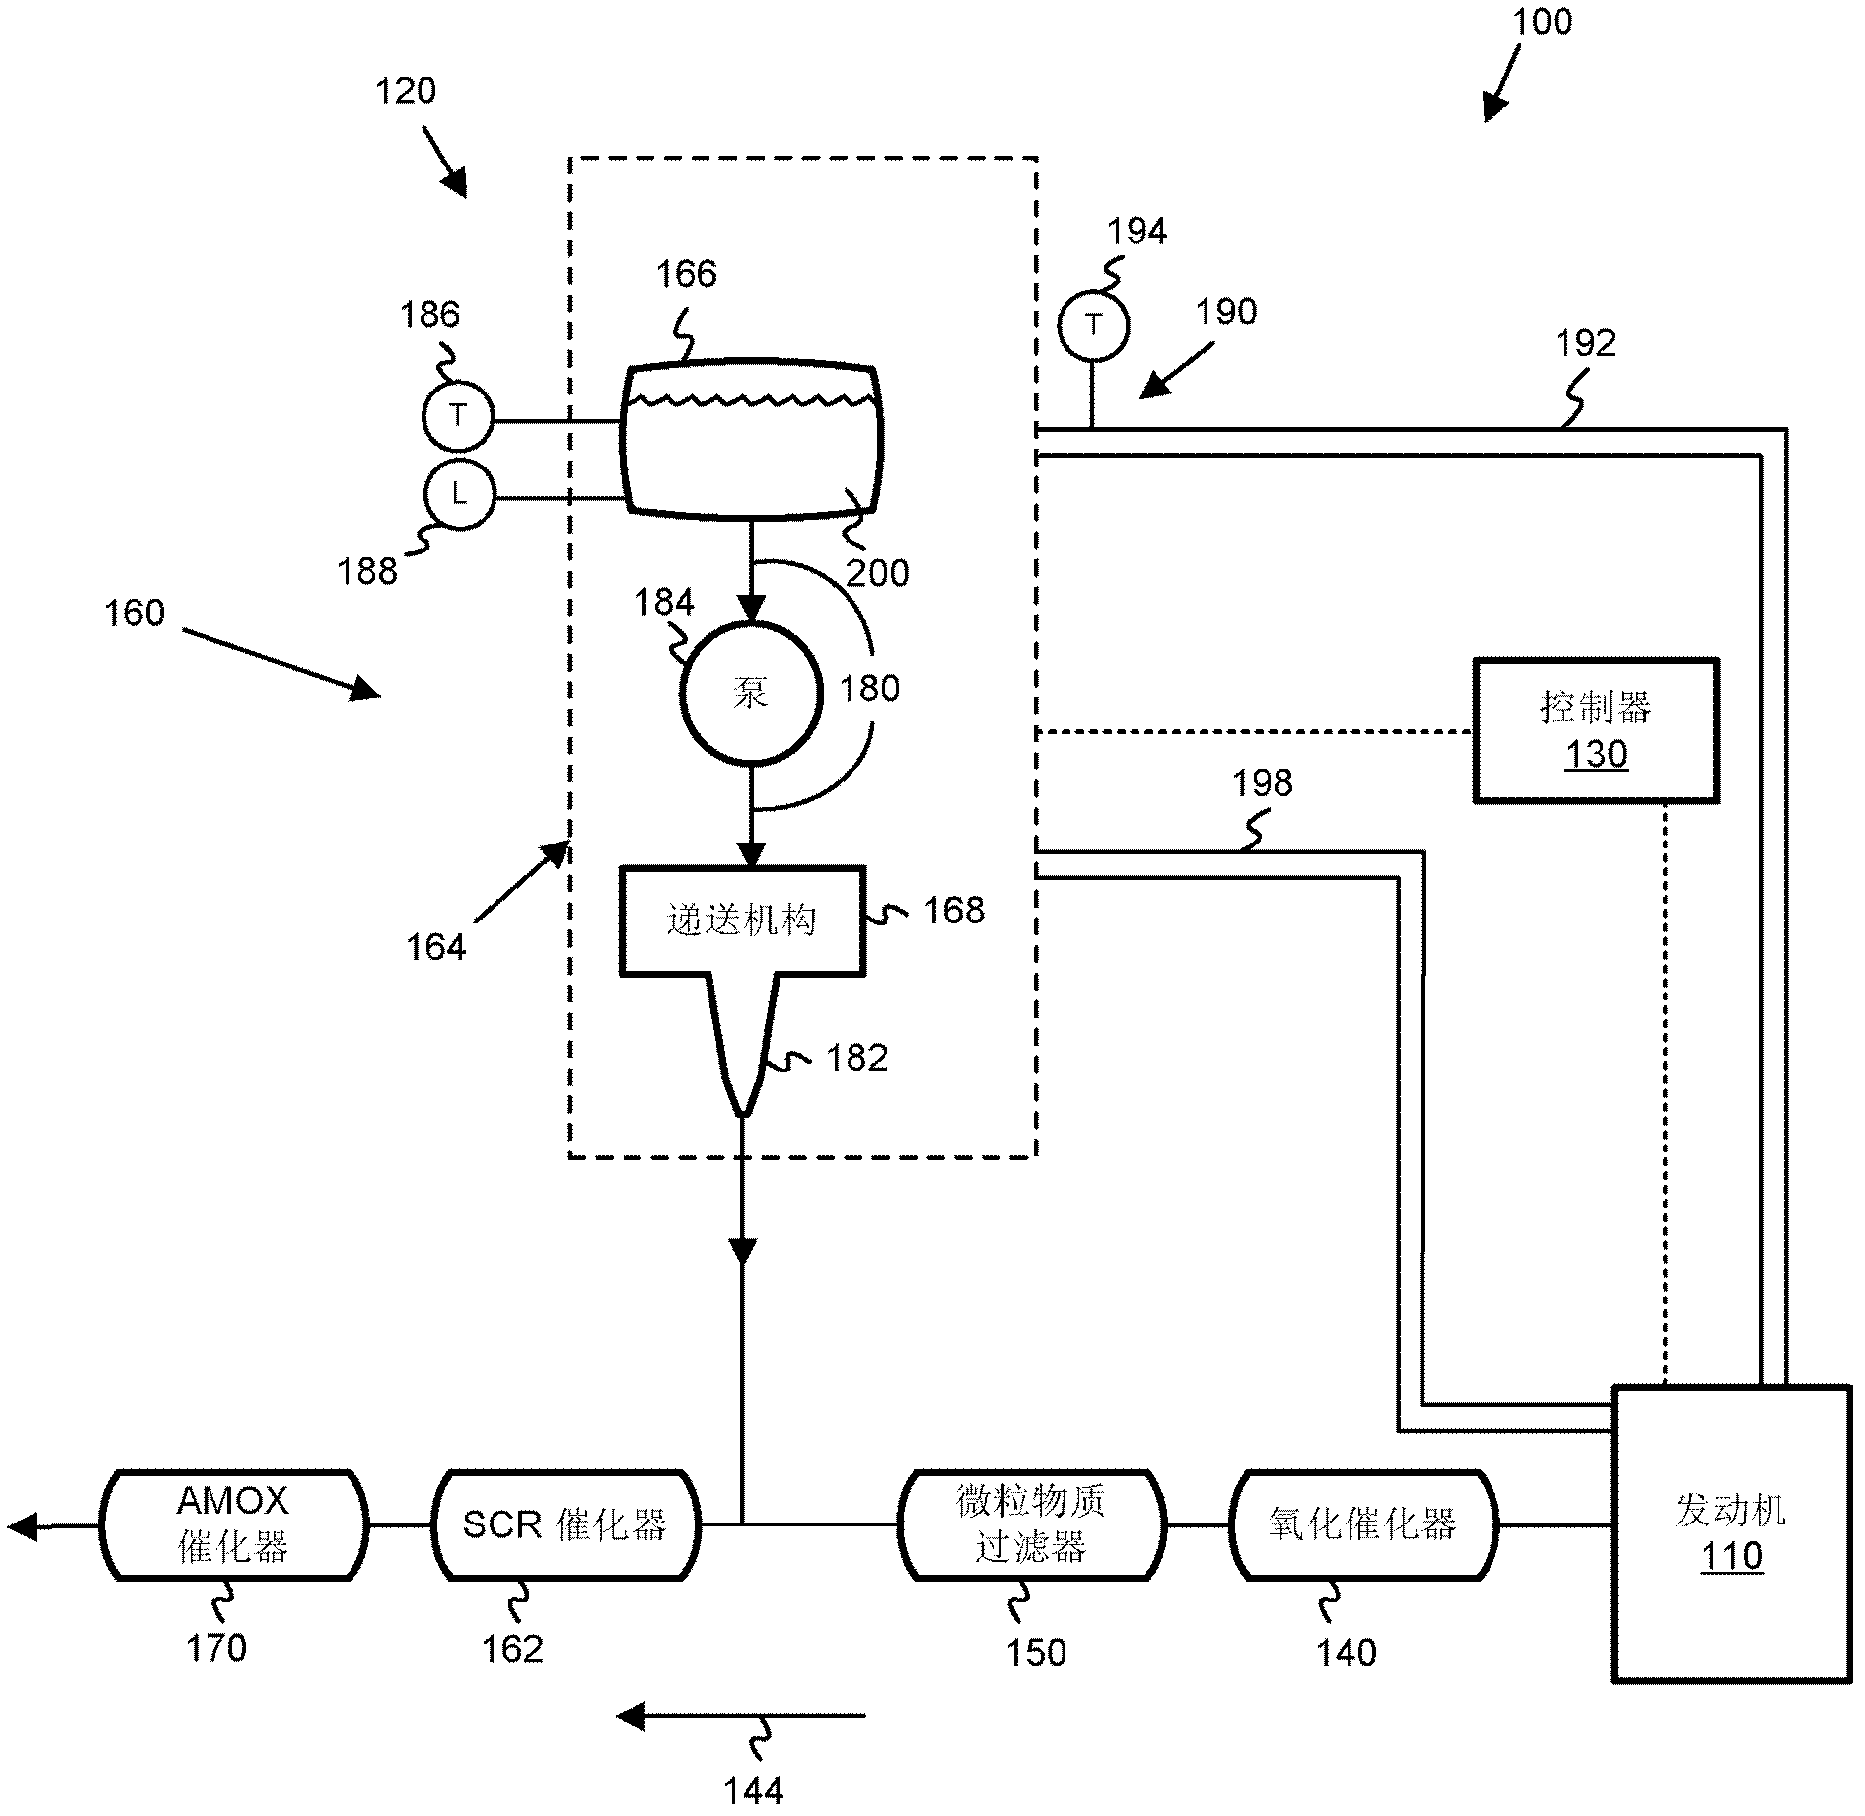 Apparatus, system, and method for reductant line heating control